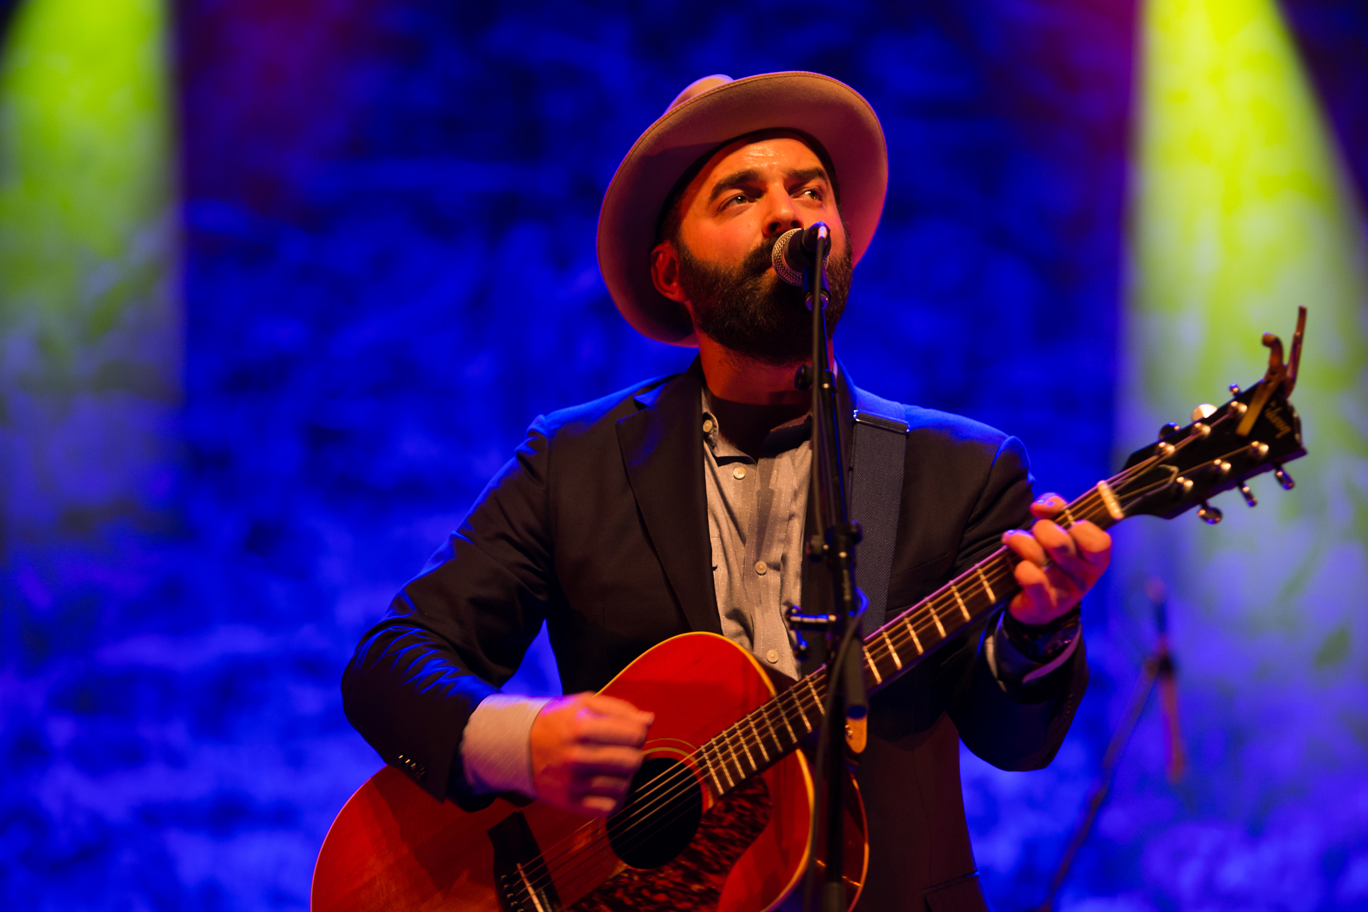 Show Review: Drew Holcomb and The Neighbors play at Charleston Music Hall, crowd demands encore